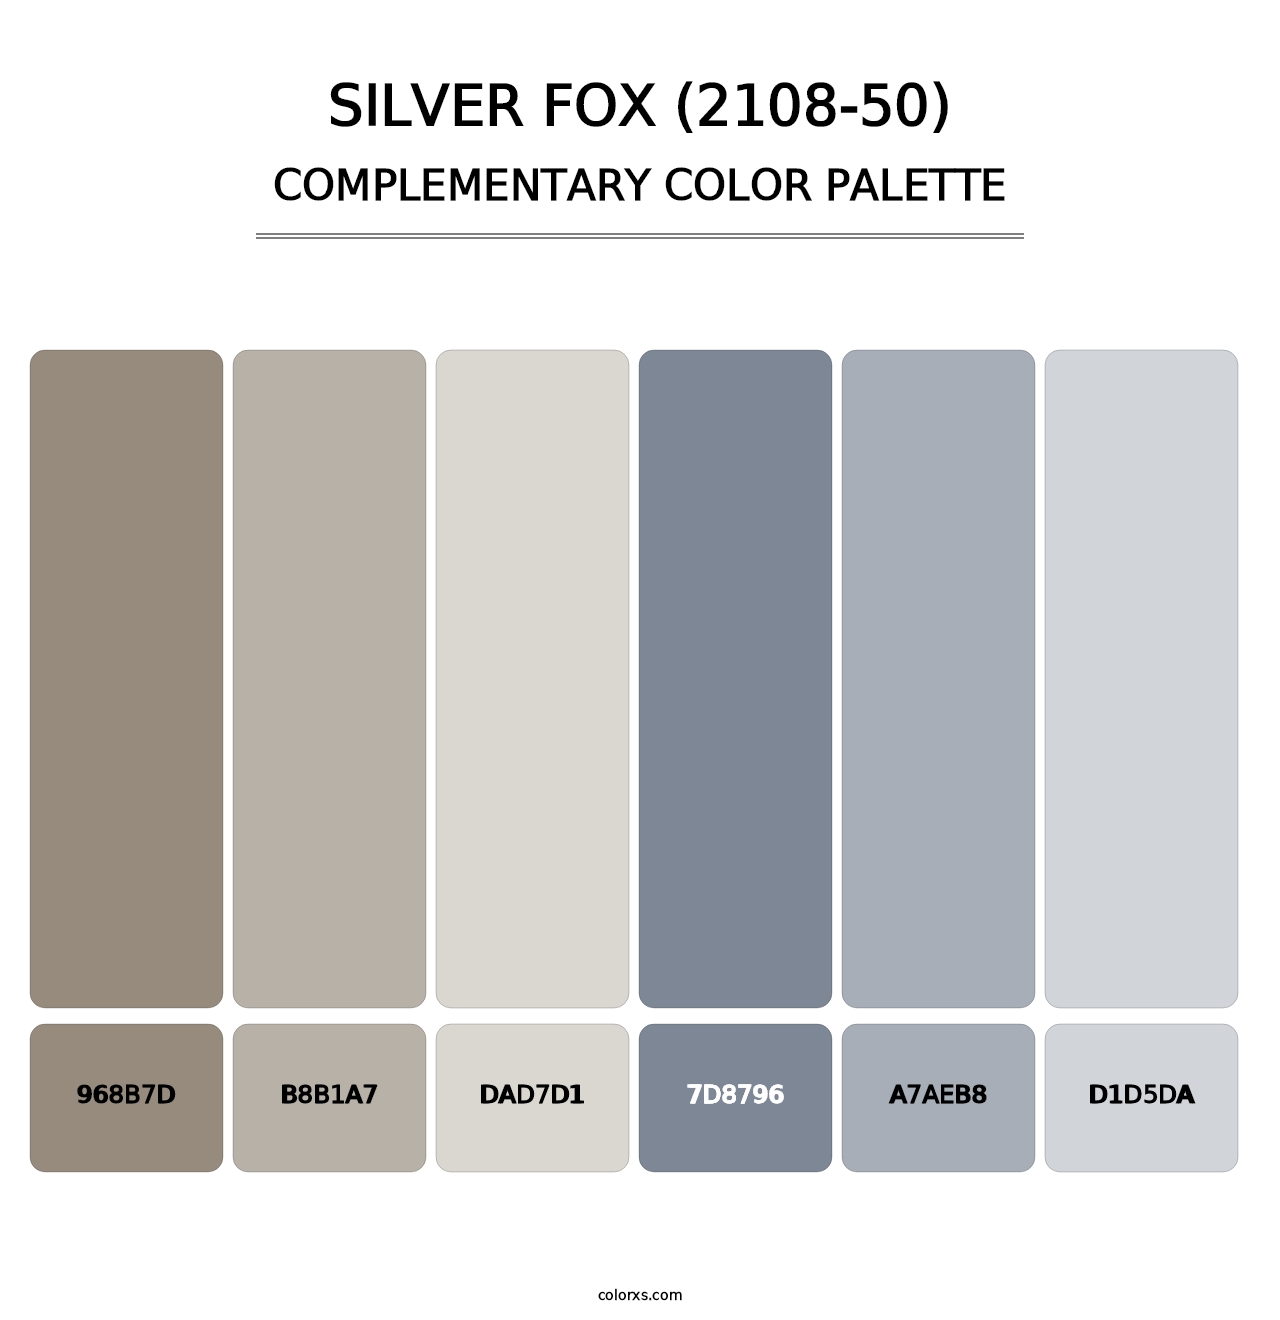 Silver Fox (2108-50) - Complementary Color Palette